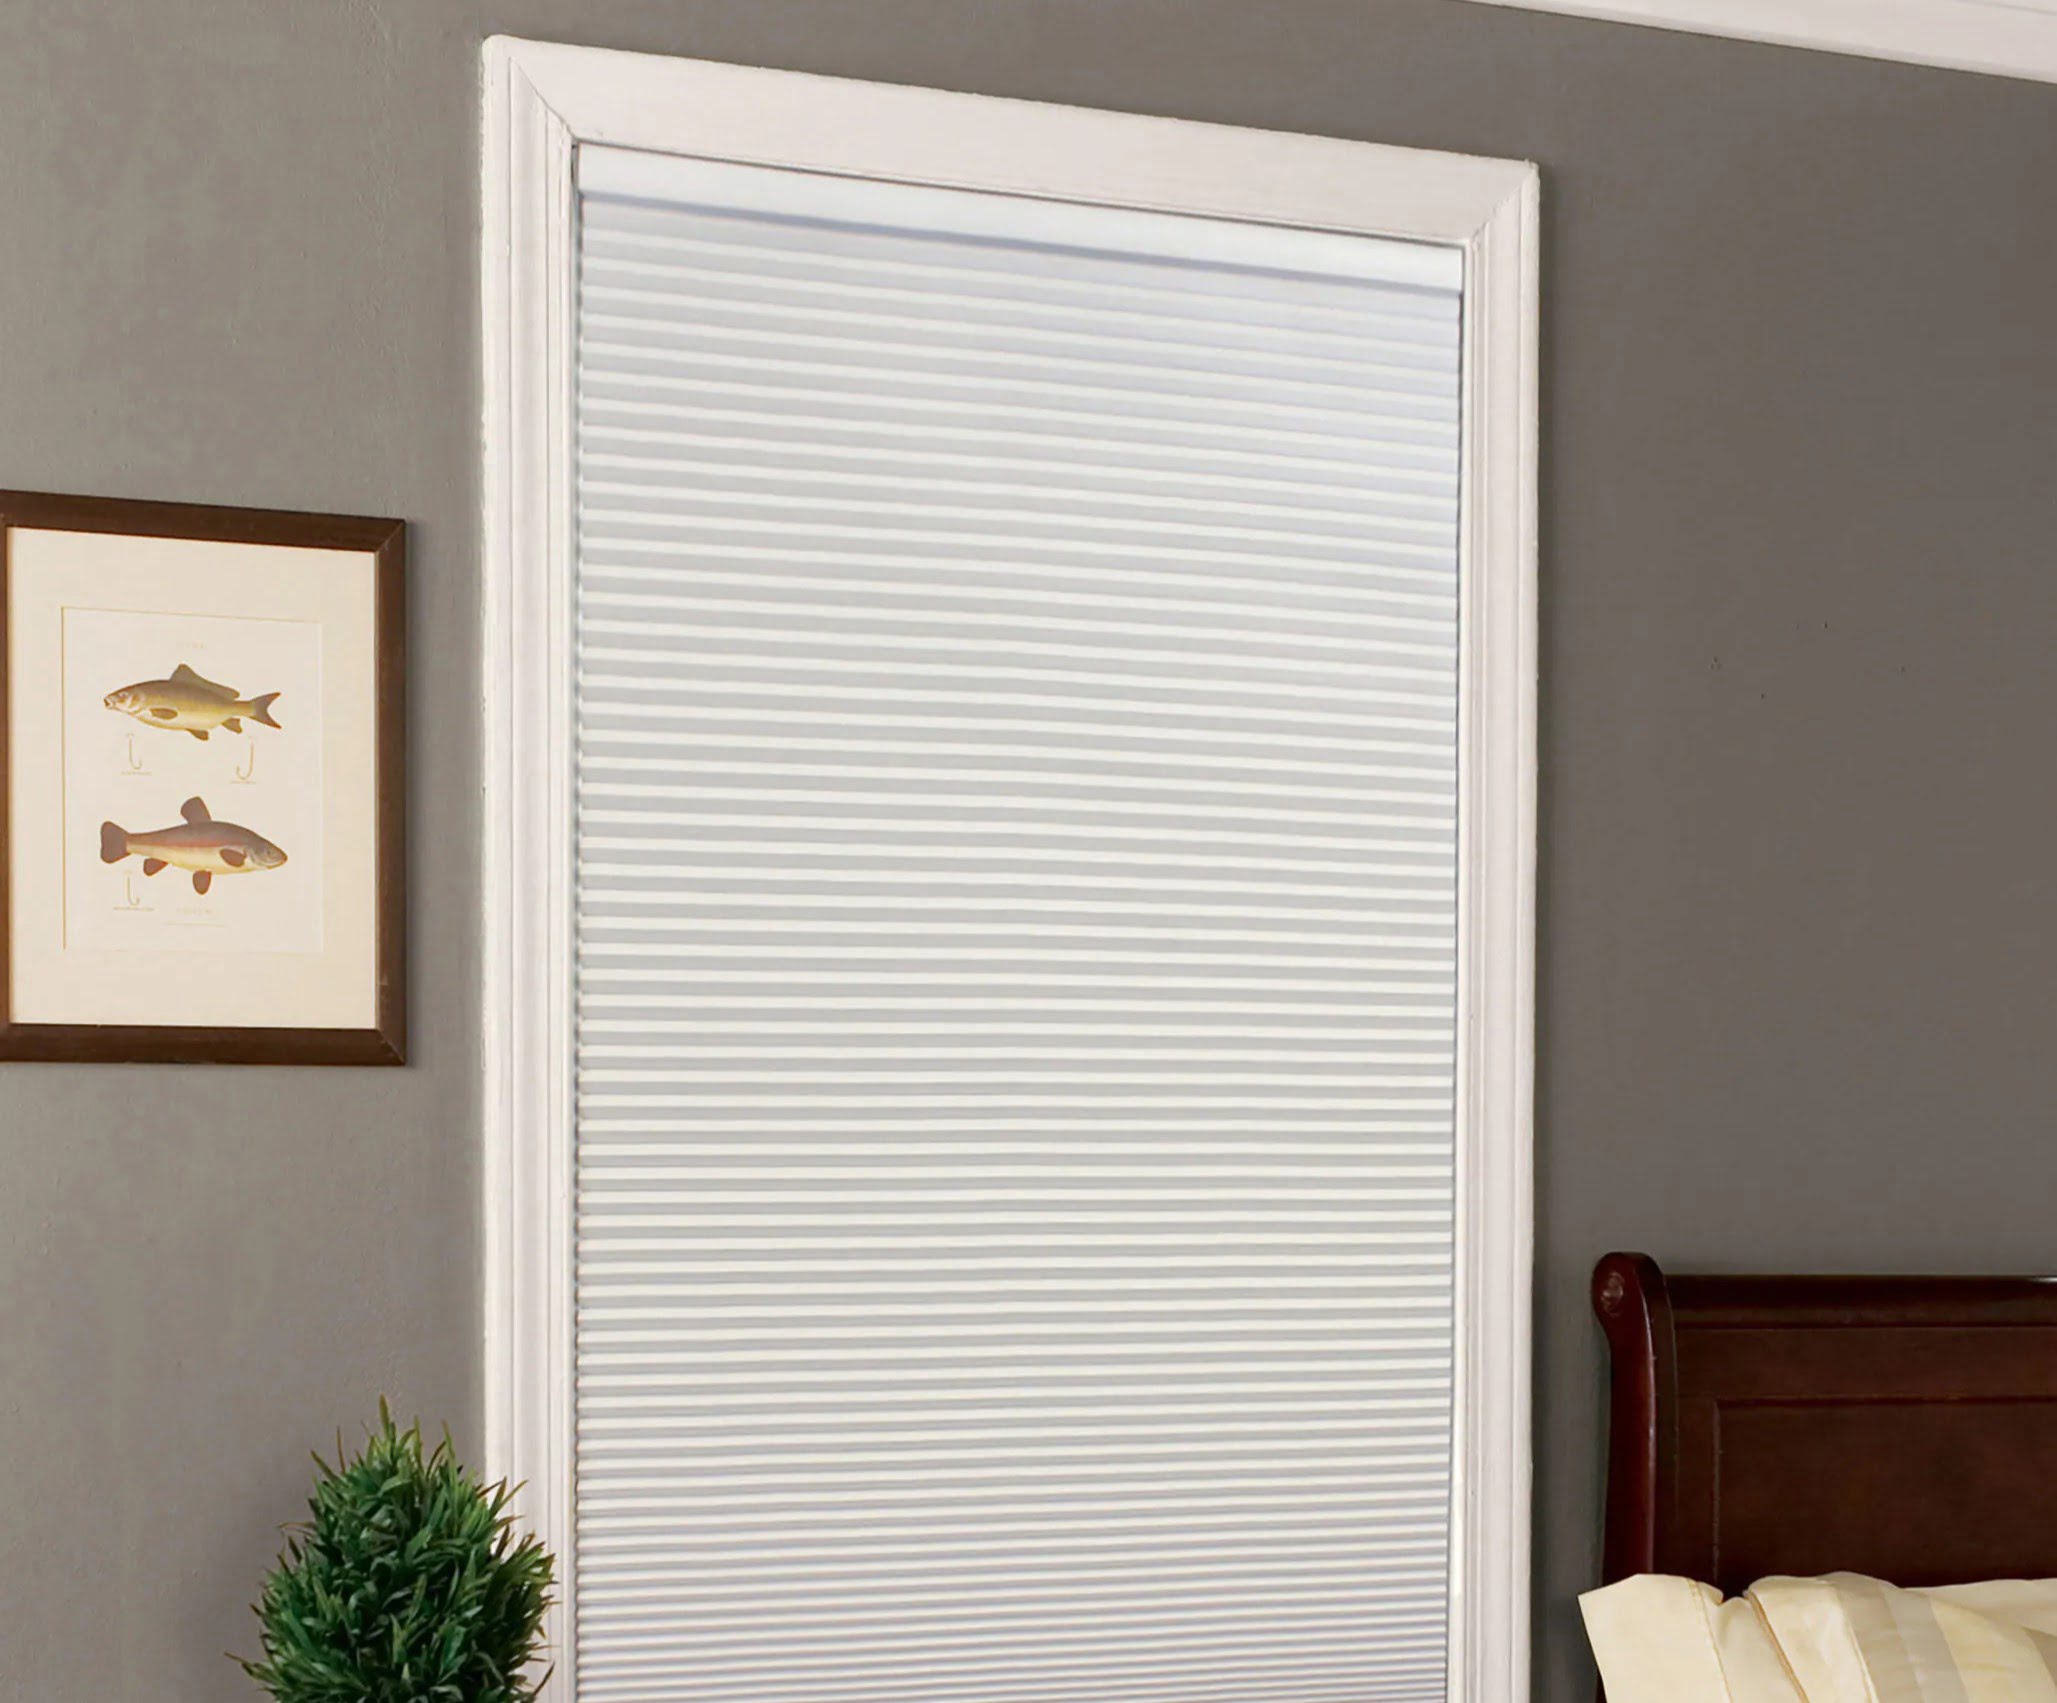 https://storables.com/wp-content/uploads/2023/12/how-to-install-allen-roth-blinds-1701469542.jpg